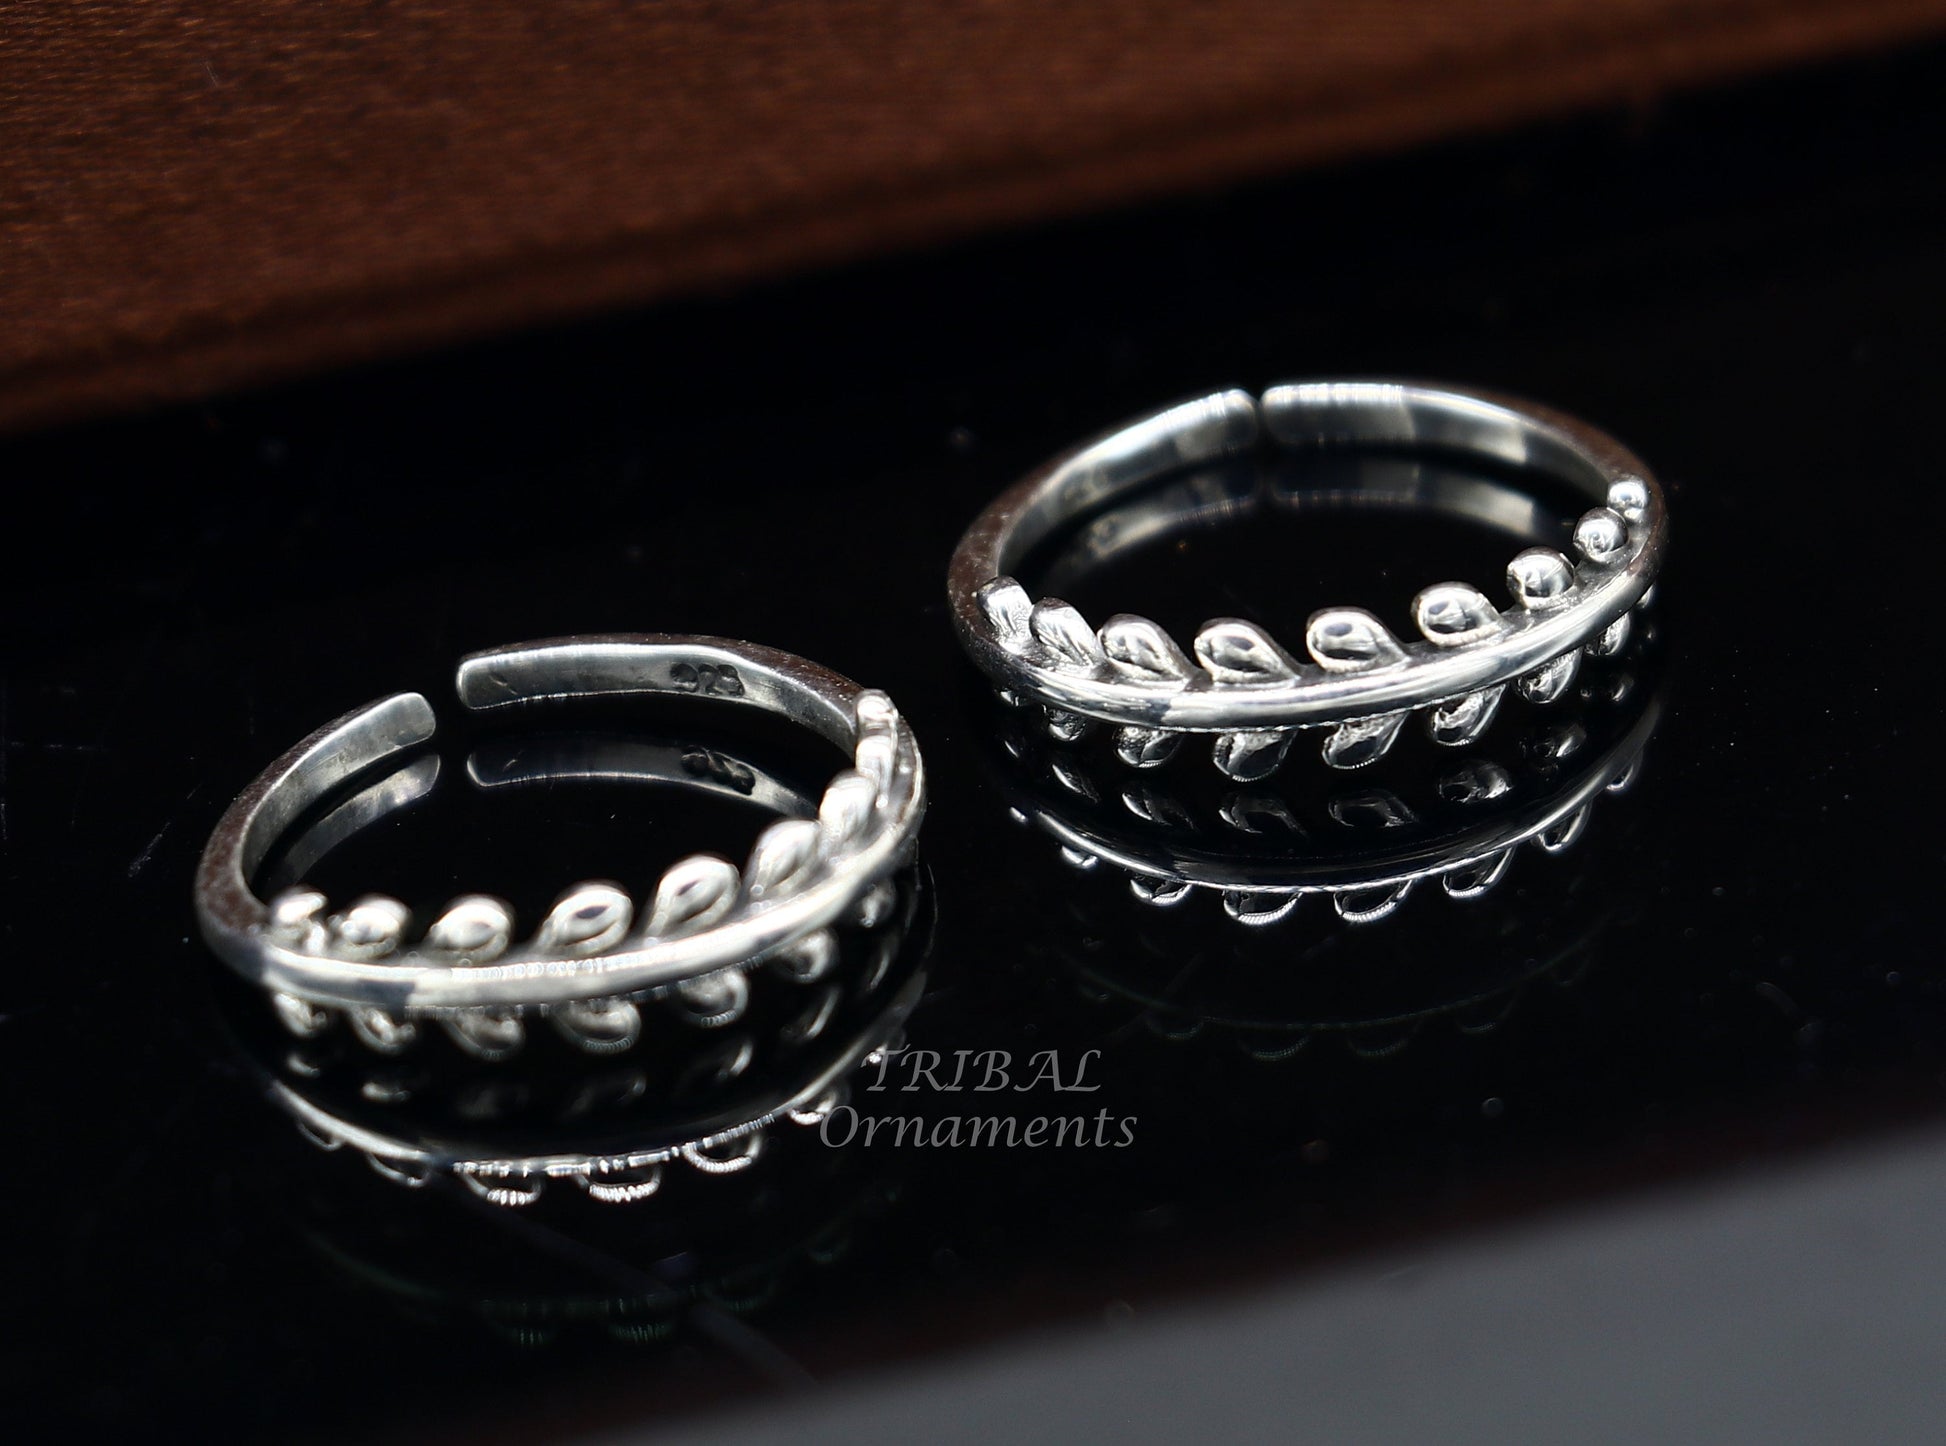 Pure 92.5 sterling silver customized design small toe ring handmade brides stylish tribal jewelry collection from inida ytr12 - TRIBAL ORNAMENTS